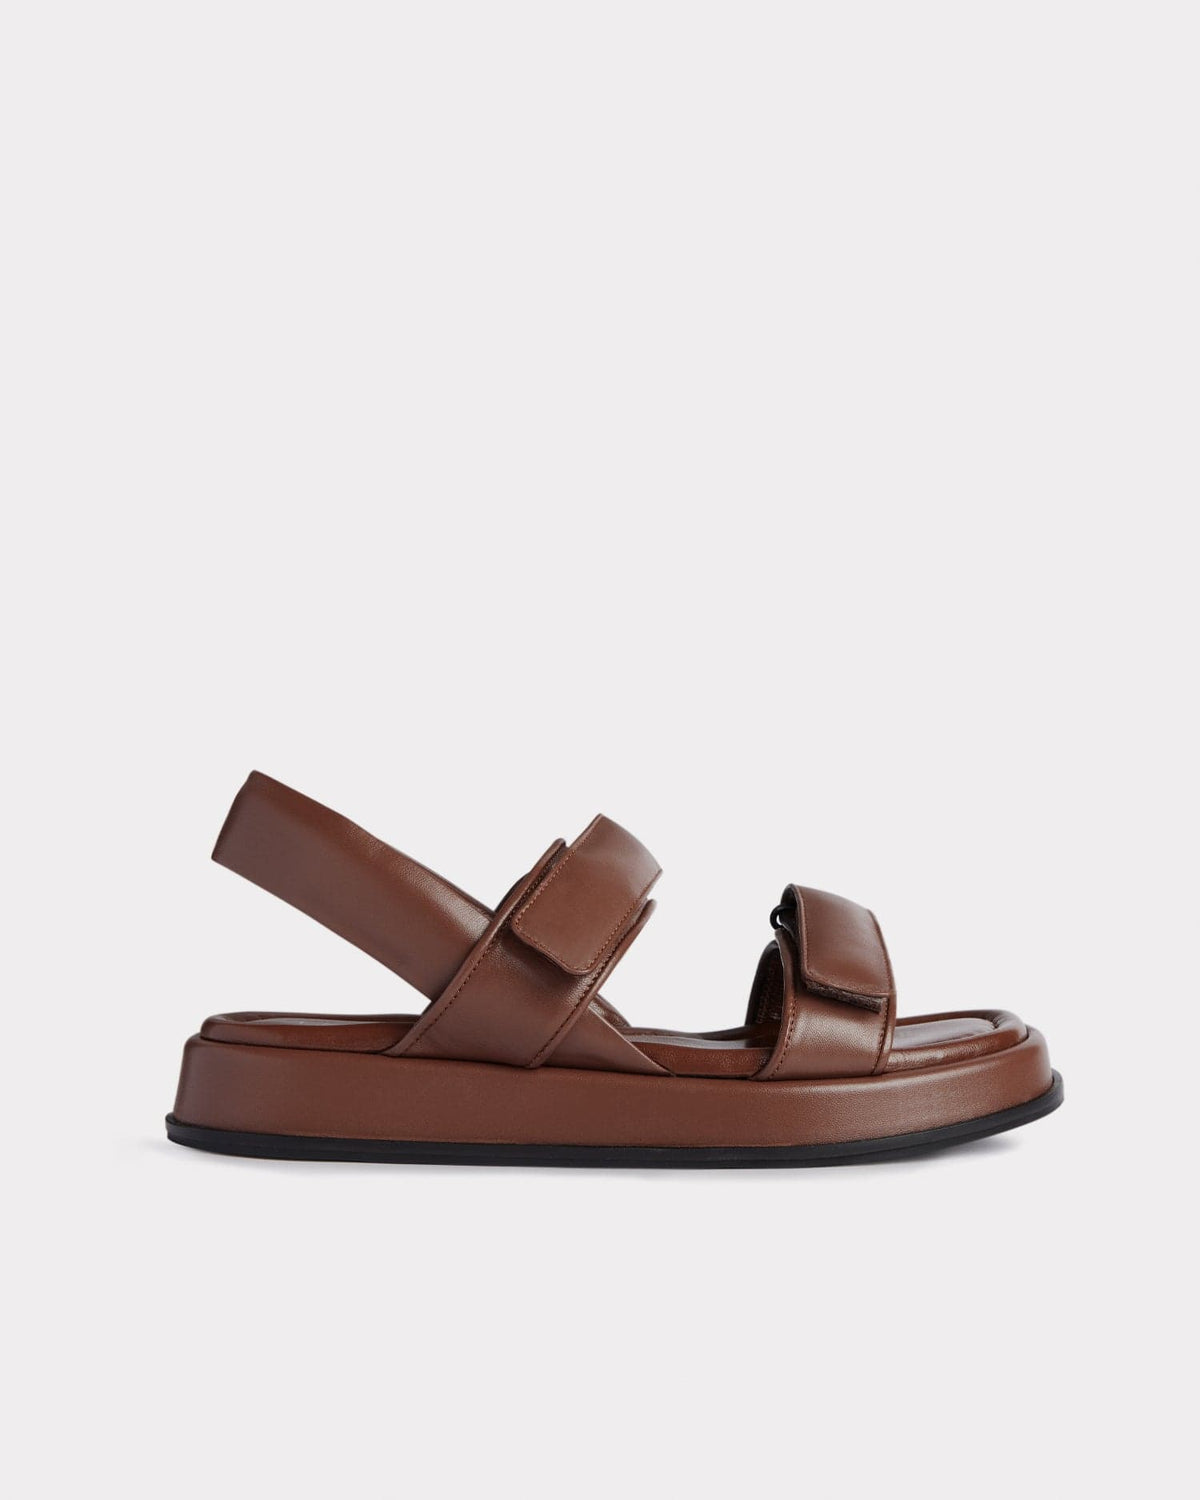 The Sporty Sandal - Chocolate Sandals ESSĒN Brown Leather 35